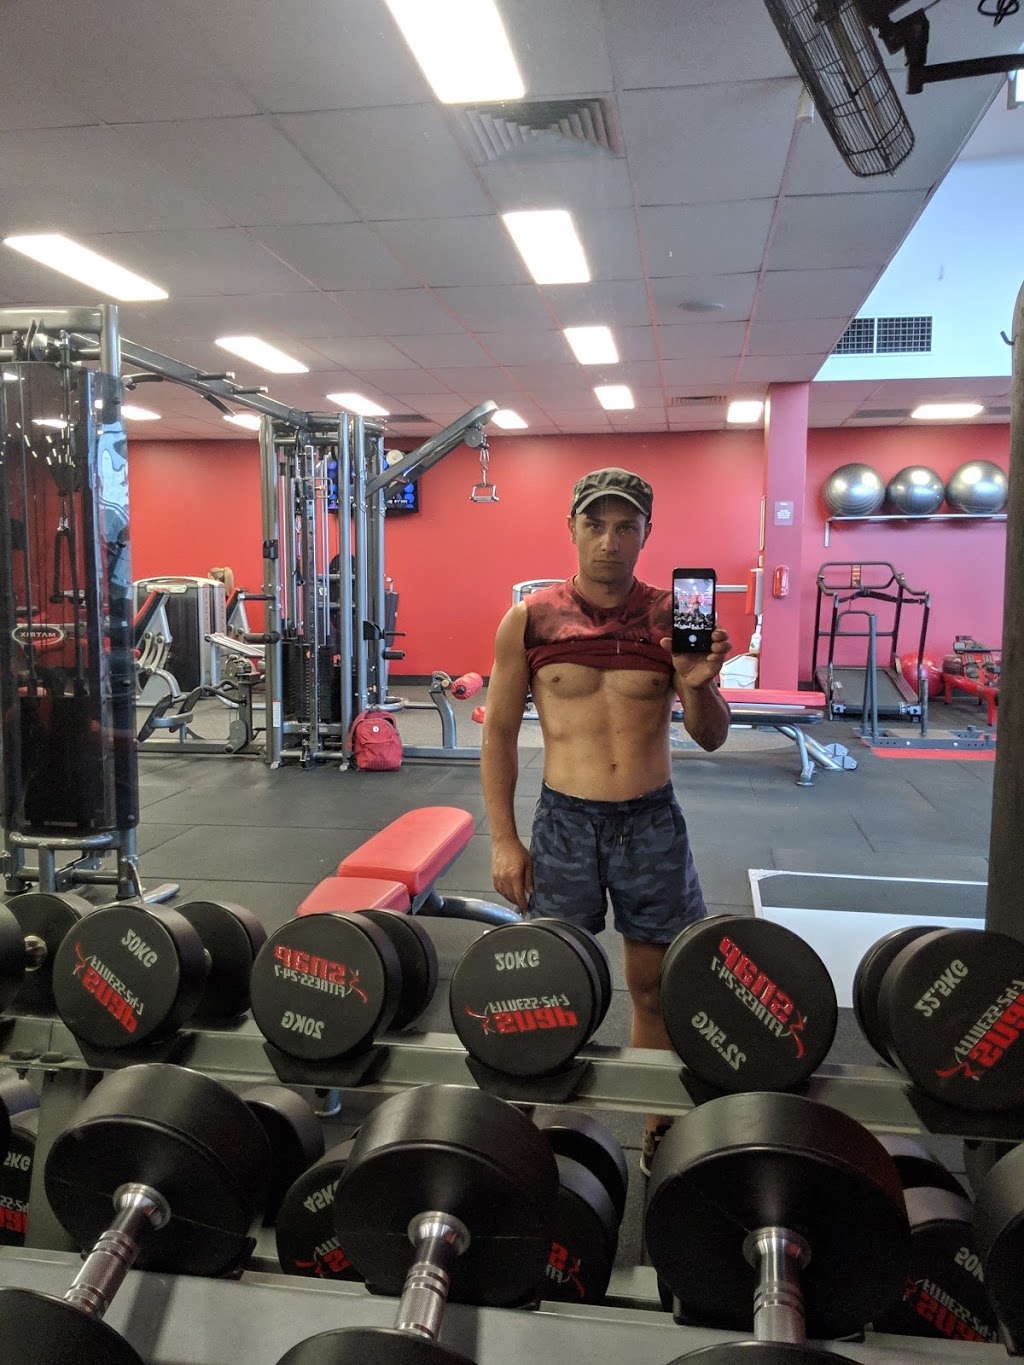 Snap Fitness Epping | gym | 560-650 High St, Epping VIC 3076, Australia | 0406576275 OR +61 406 576 275